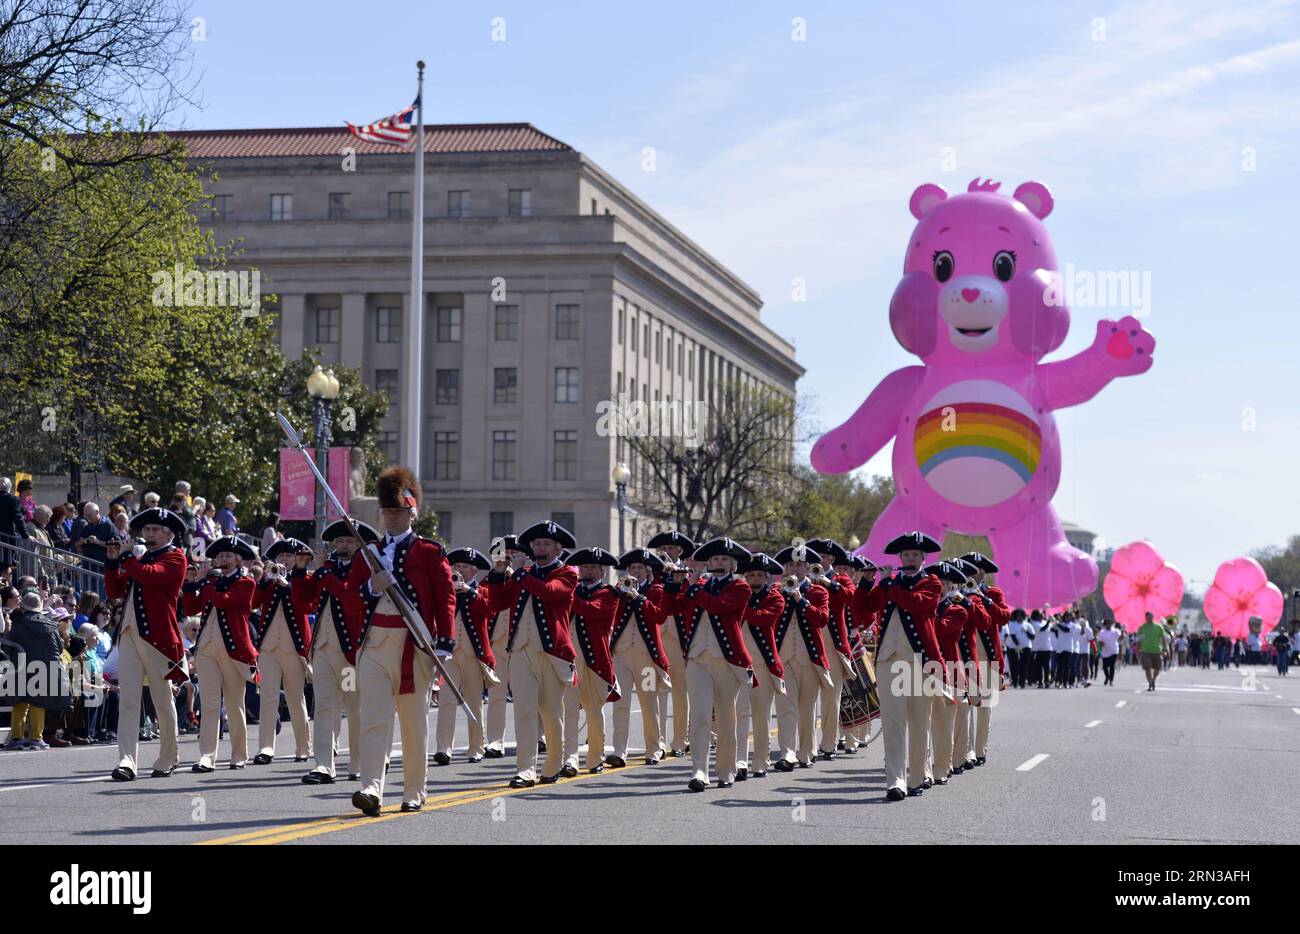 (150411) -- WASHINGTON D.C., April 11, 2015 -- Soldiers of a military band attend the annual Cherry Blossom Festival Parade along the Constitution Avenue in Washington D.C., capital of the United States, April 11, 2015. The parade is one of the US capital s biggest public events, drawing about 100,000 spectators from around the world. ) U.S.-WASHINGTON D.C.-CHERRY BLOSSOM-FESTIVAL YinxBogu PUBLICATIONxNOTxINxCHN   Washington D C April 11 2015 Soldiers of a Military Tie attend The Annual Cherry Blossom Festival Parade Along The Constitution Avenue in Washington D C Capital of The United States Stock Photo